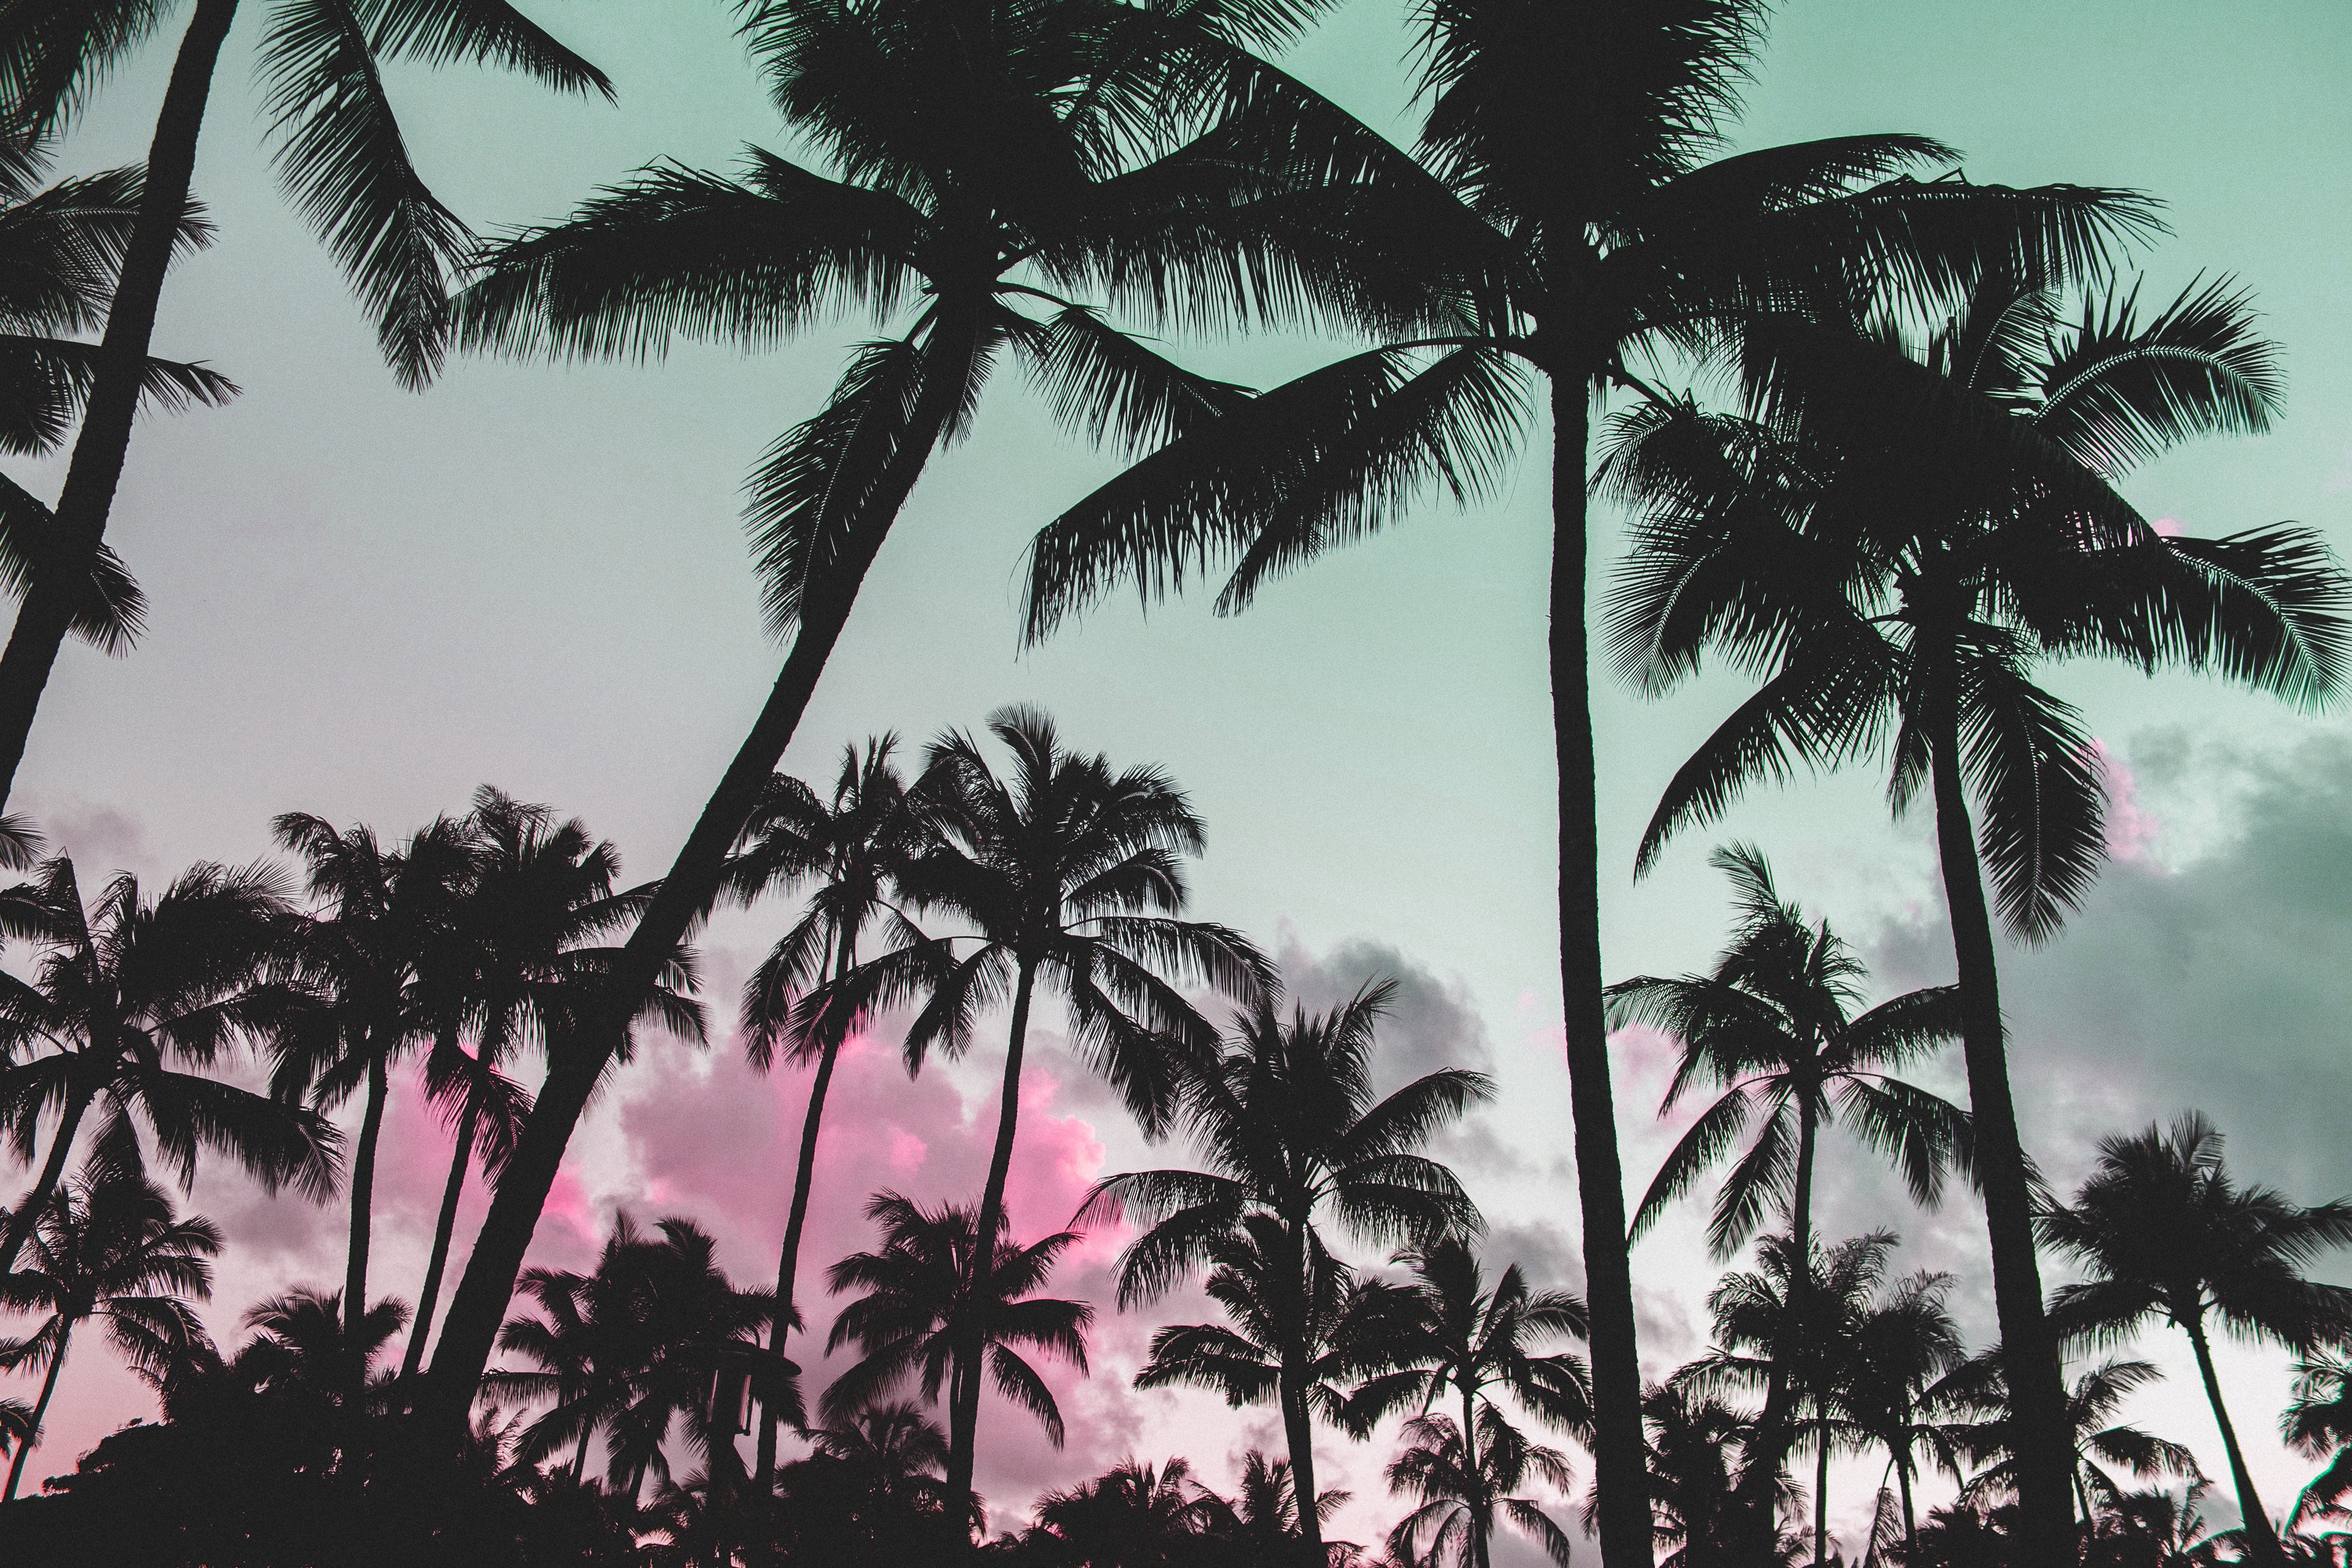 General 3000x2000 glitch art nature vaporwave palm trees pink silhouette